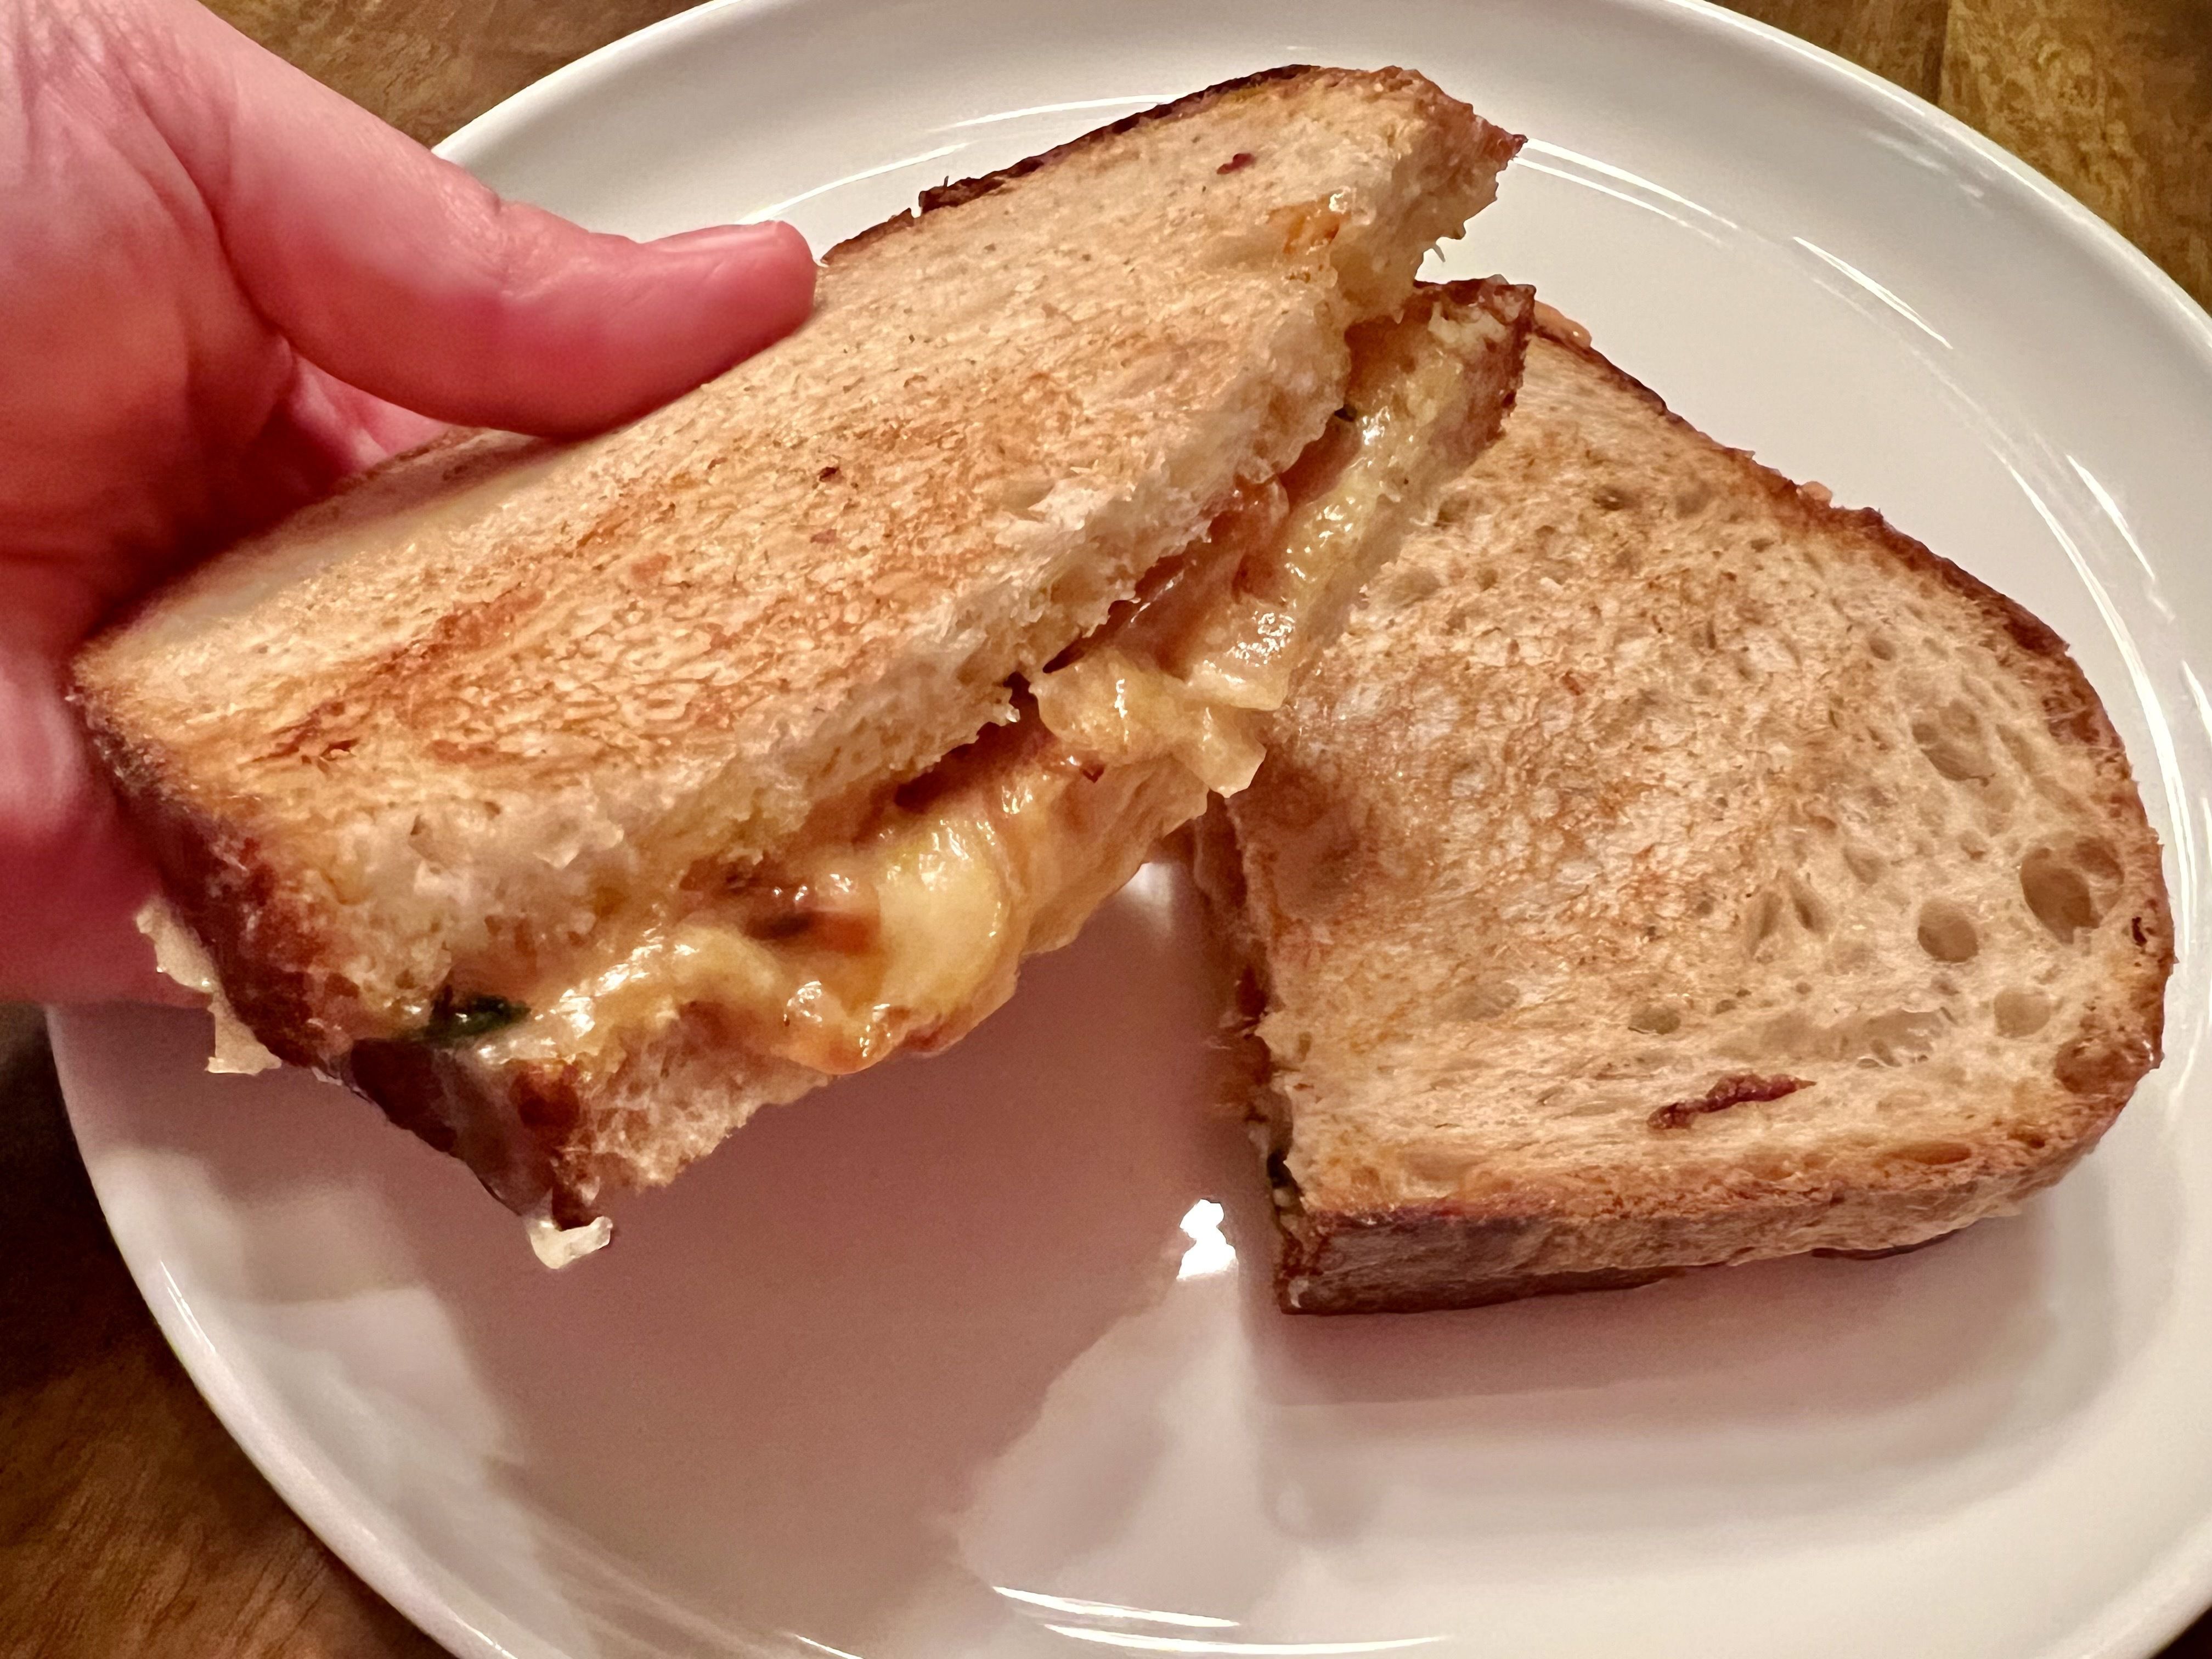 One hand holds half of a grilled cheese while the other half sits on a white plate.